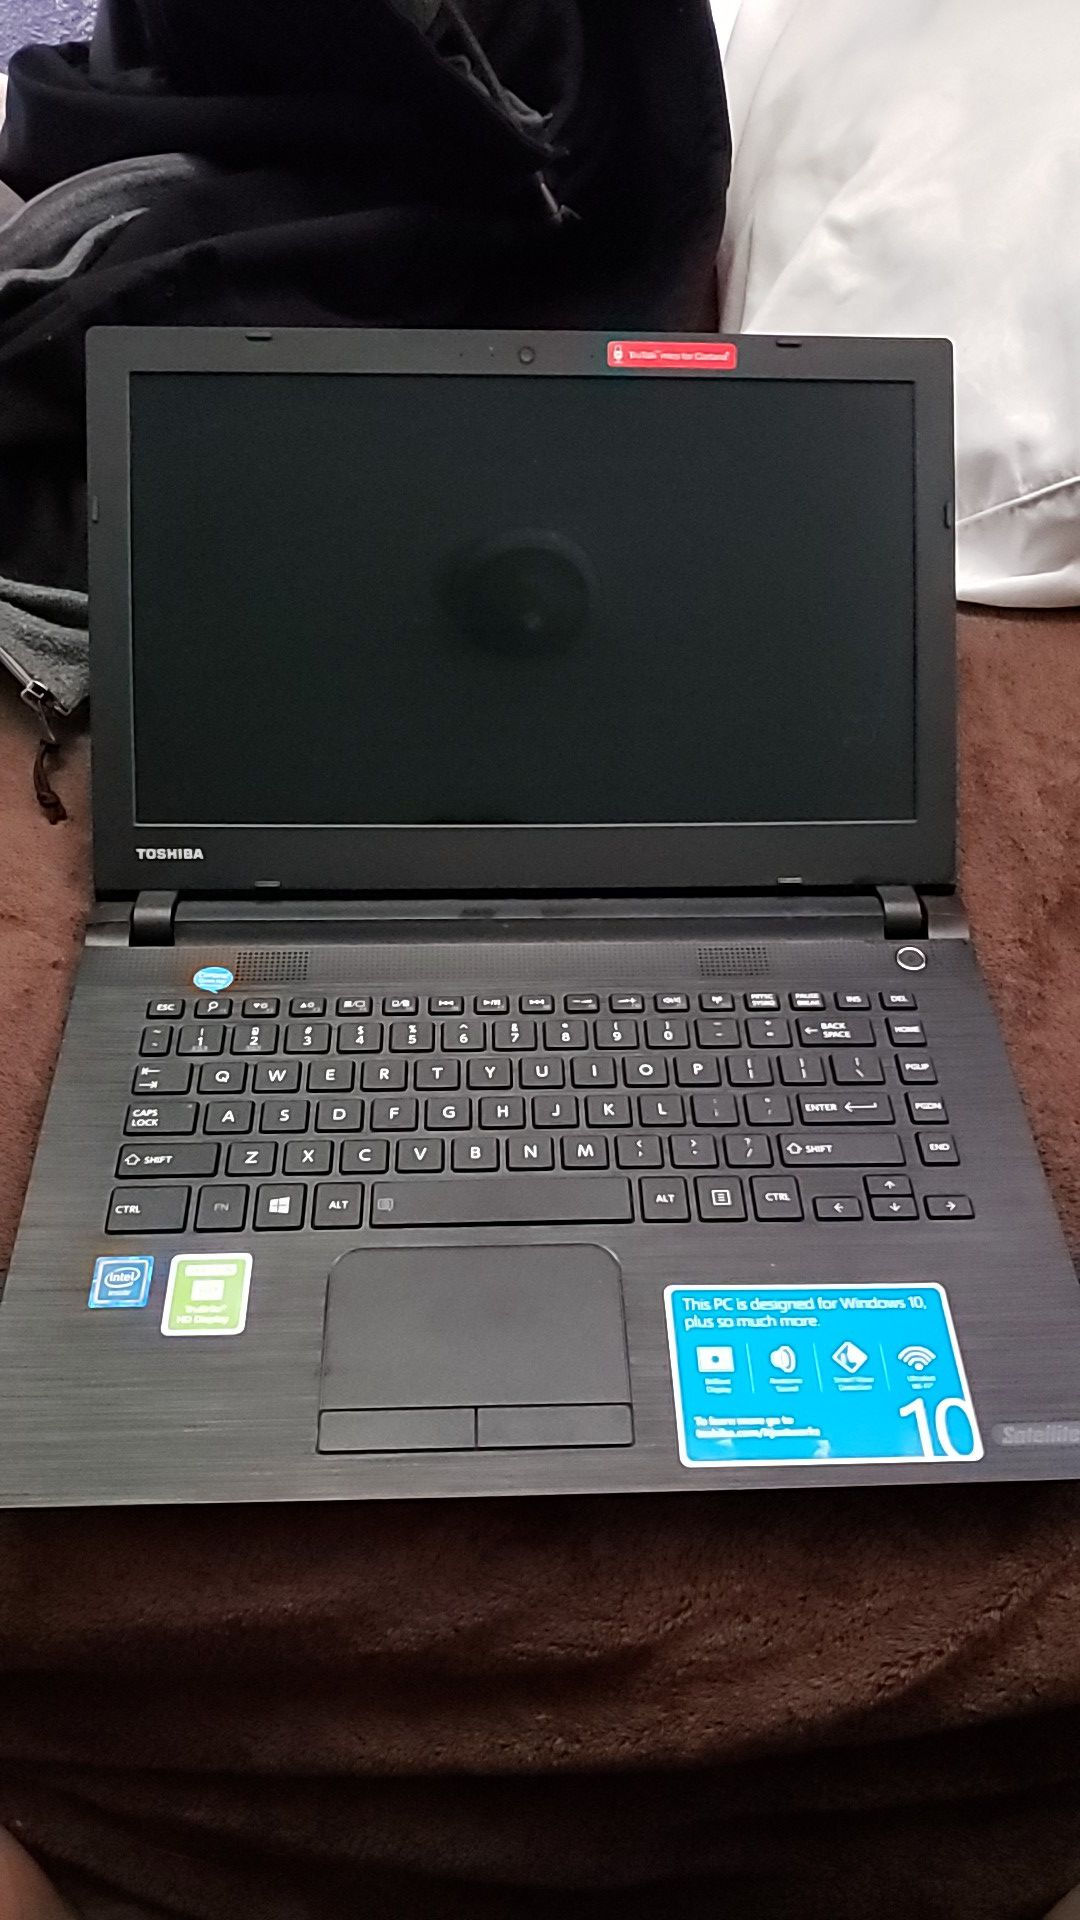 Toshiba CL45-C4330 14" Laptop with iBUYPOWER mouse